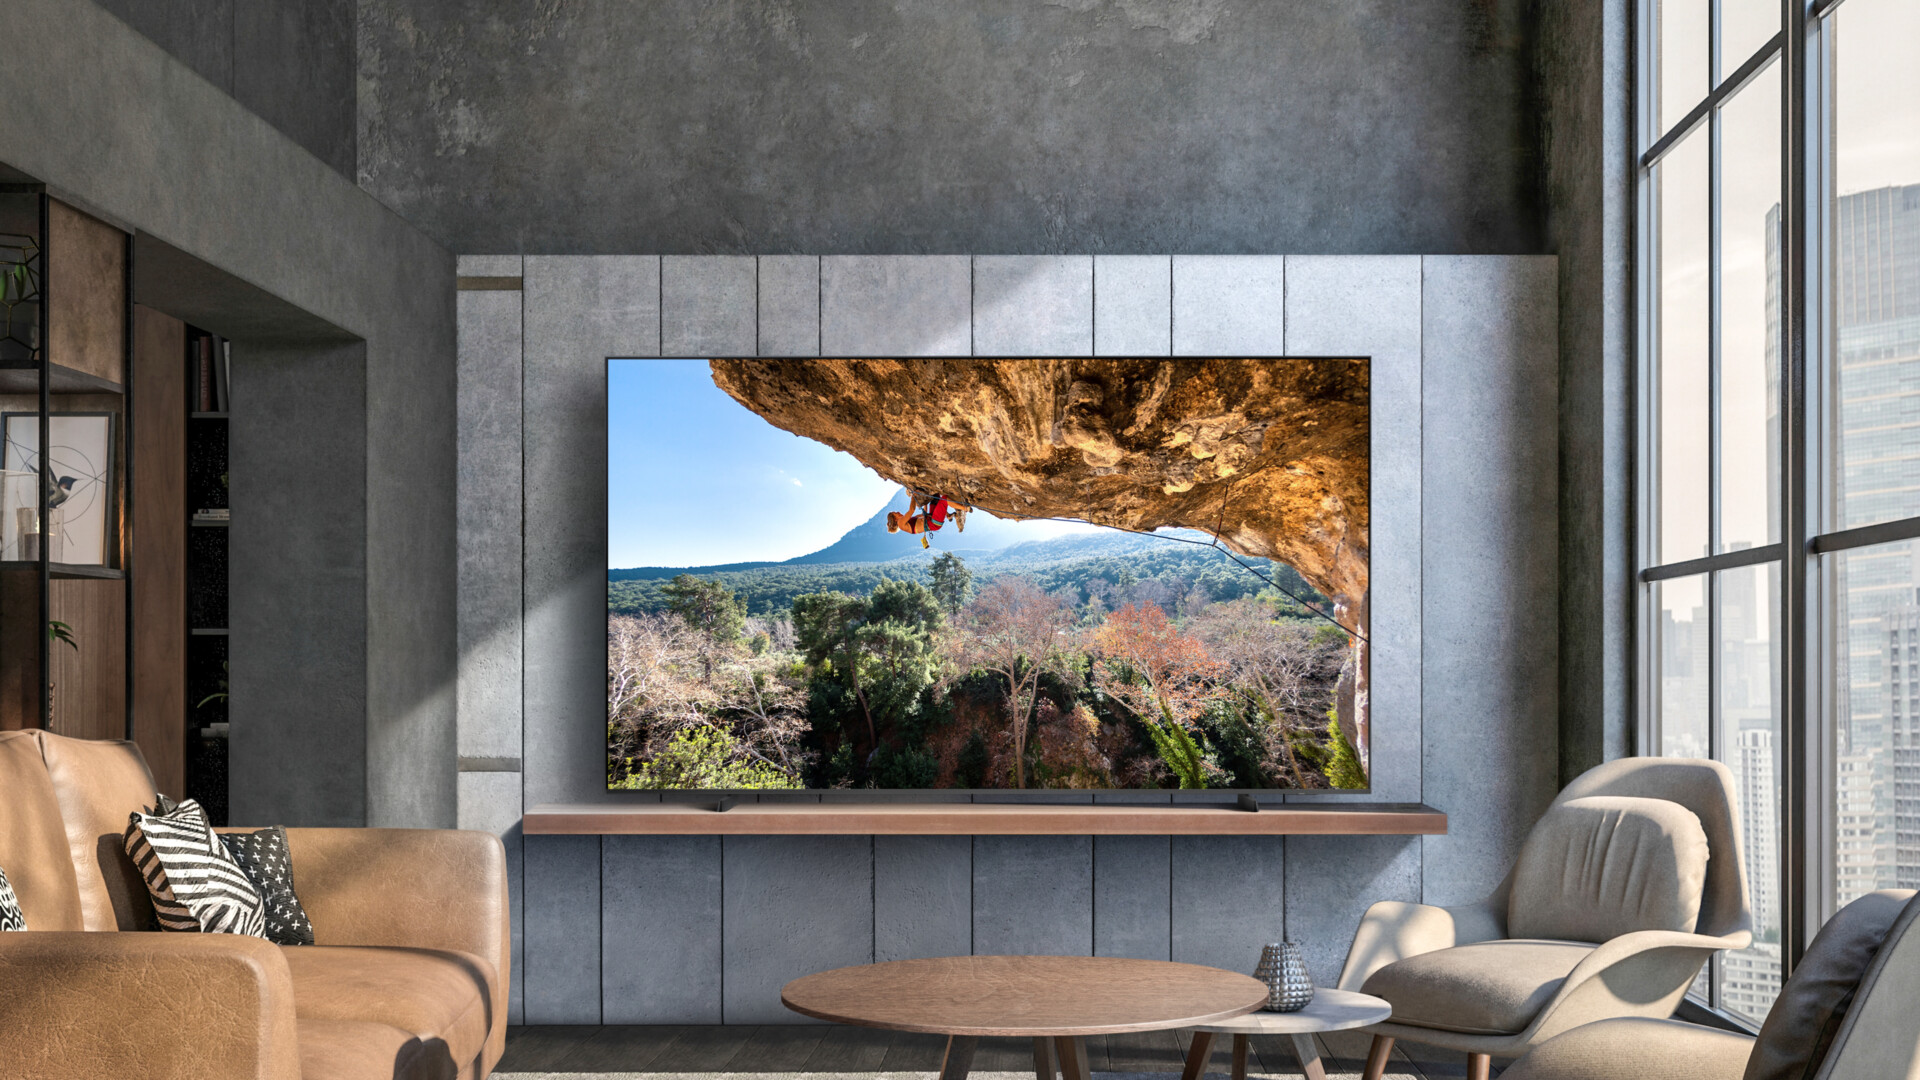 New large screen from Samsung – sound and picture